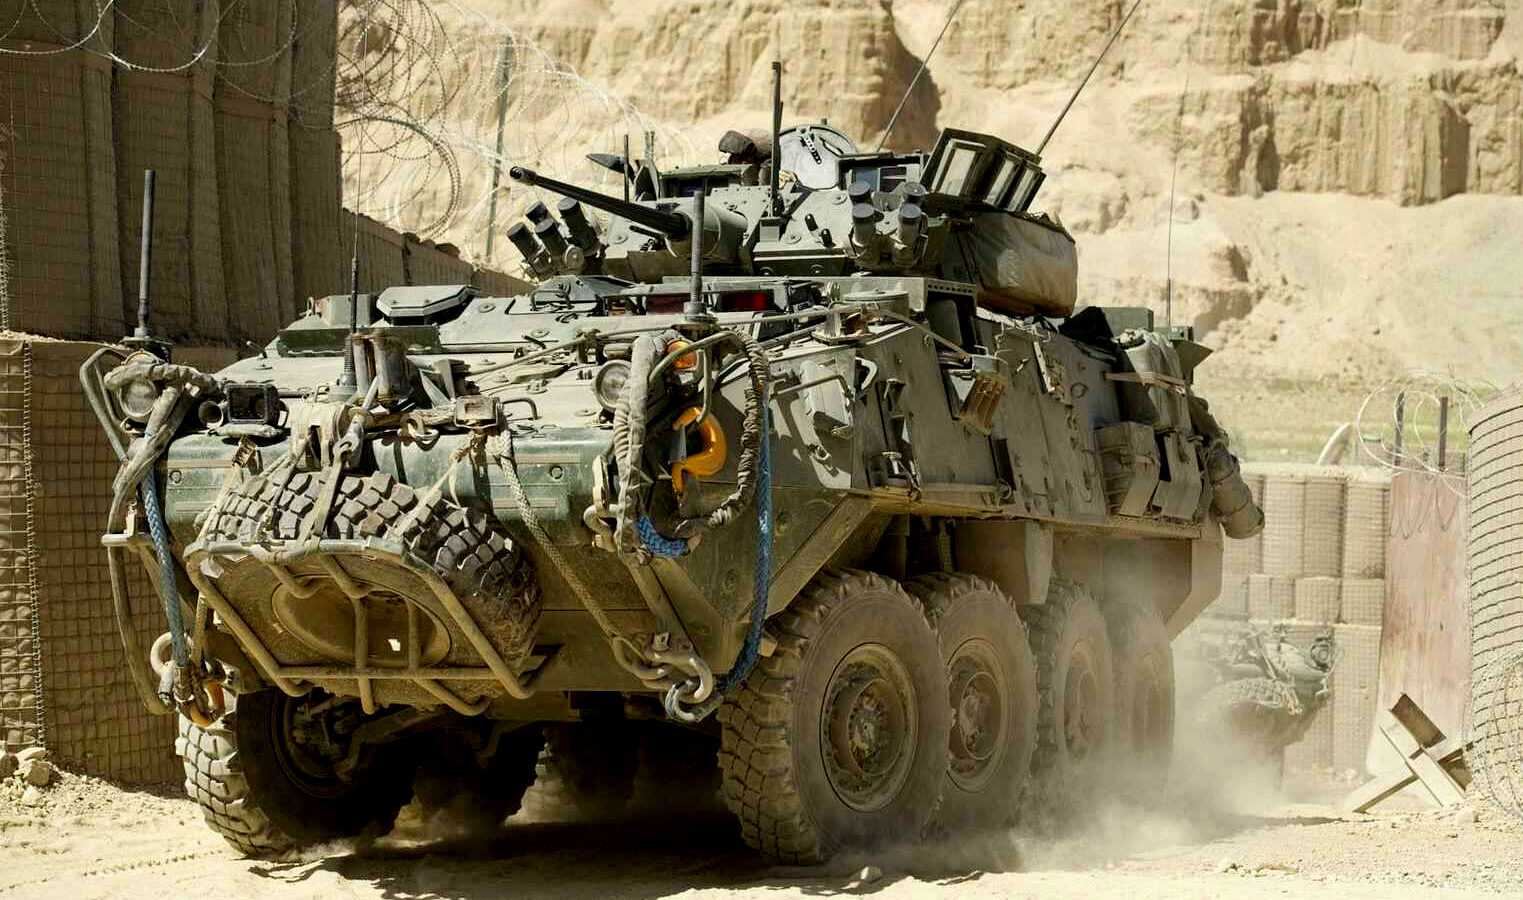 The LAV III armoured vehicle (AV) is the latest in the Generation III Light Armoured Vehicle (LAV) series of armoured cars built by General Dynamics Land Systems, and is the primary mechanized infantry vehicle of the Canadian Army.